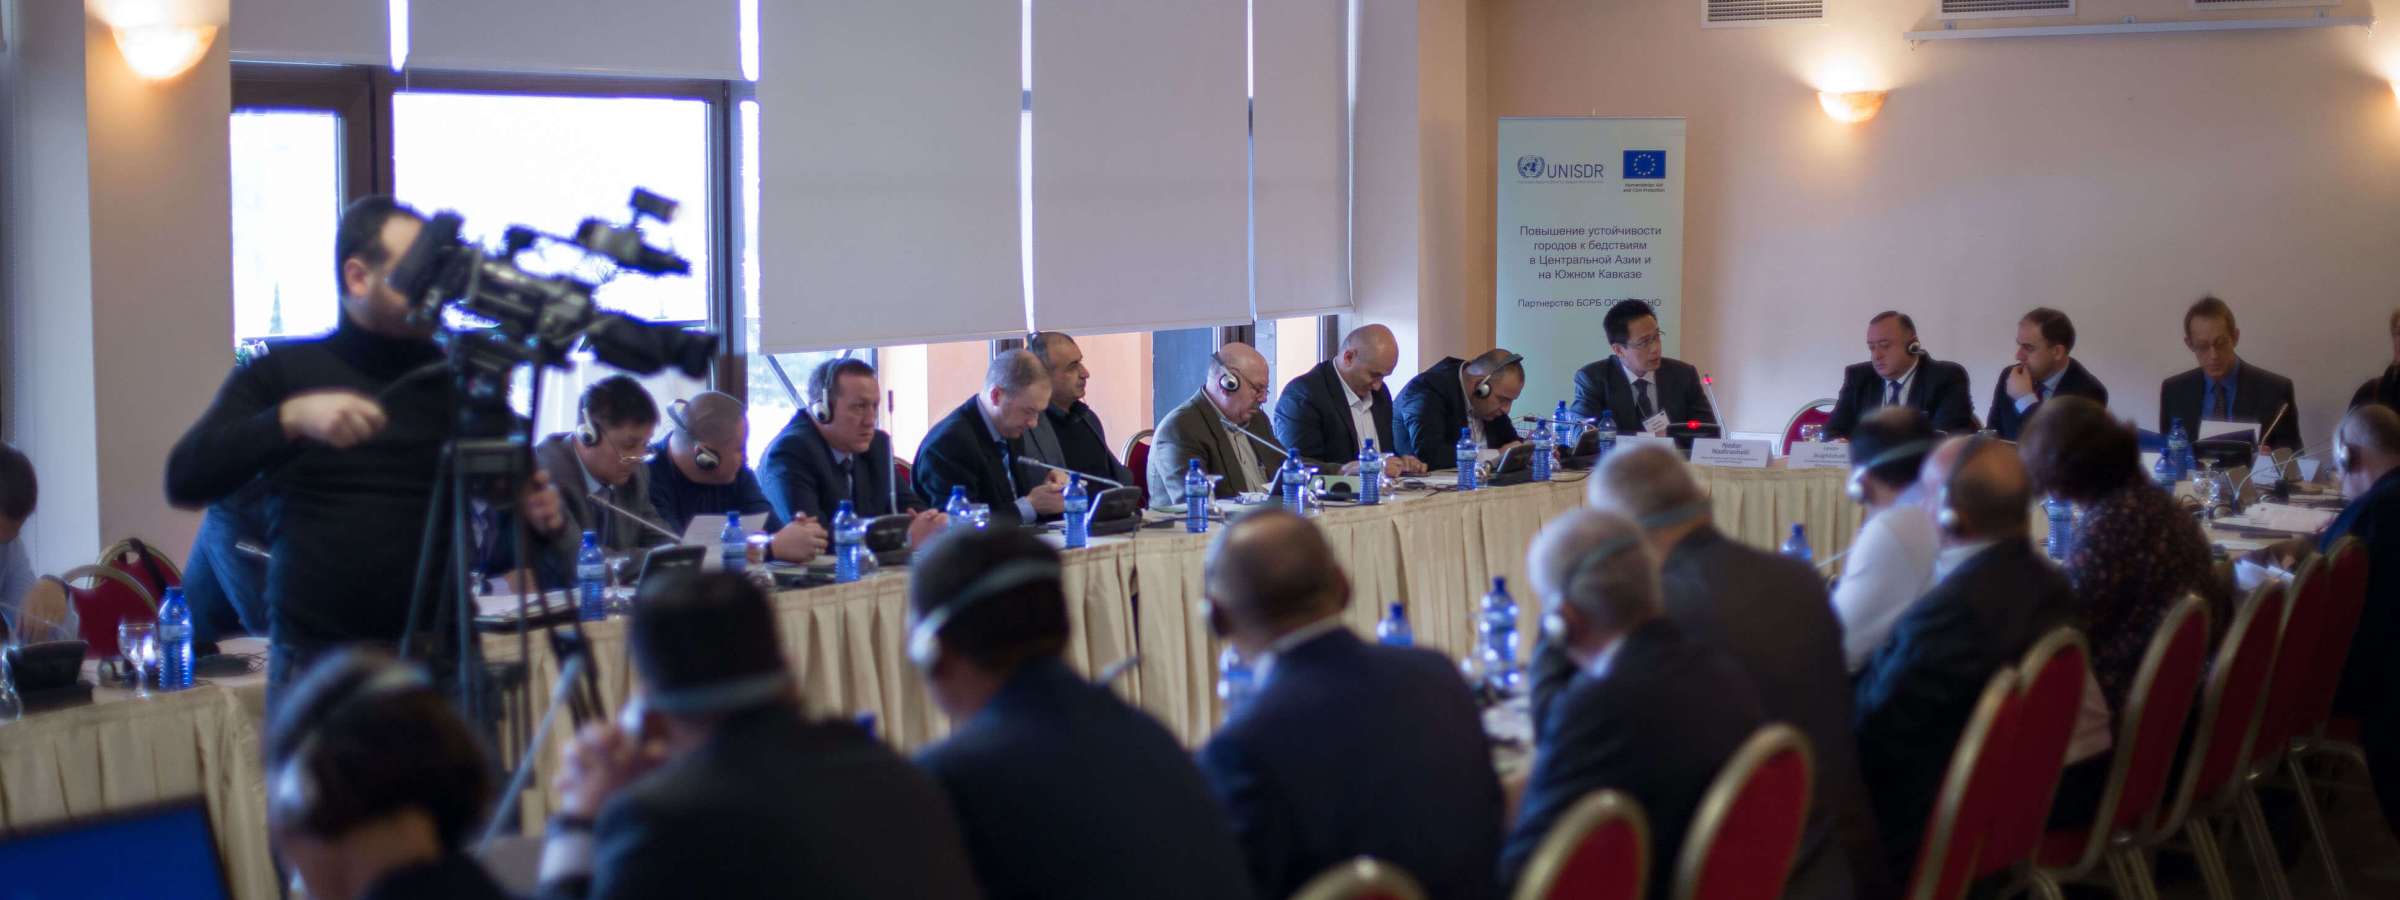 Workshop on the Resilient Cities Project in Central Asia and South Caucasus, Tbilisi, Georgia, 11 November 2015 Roundtable